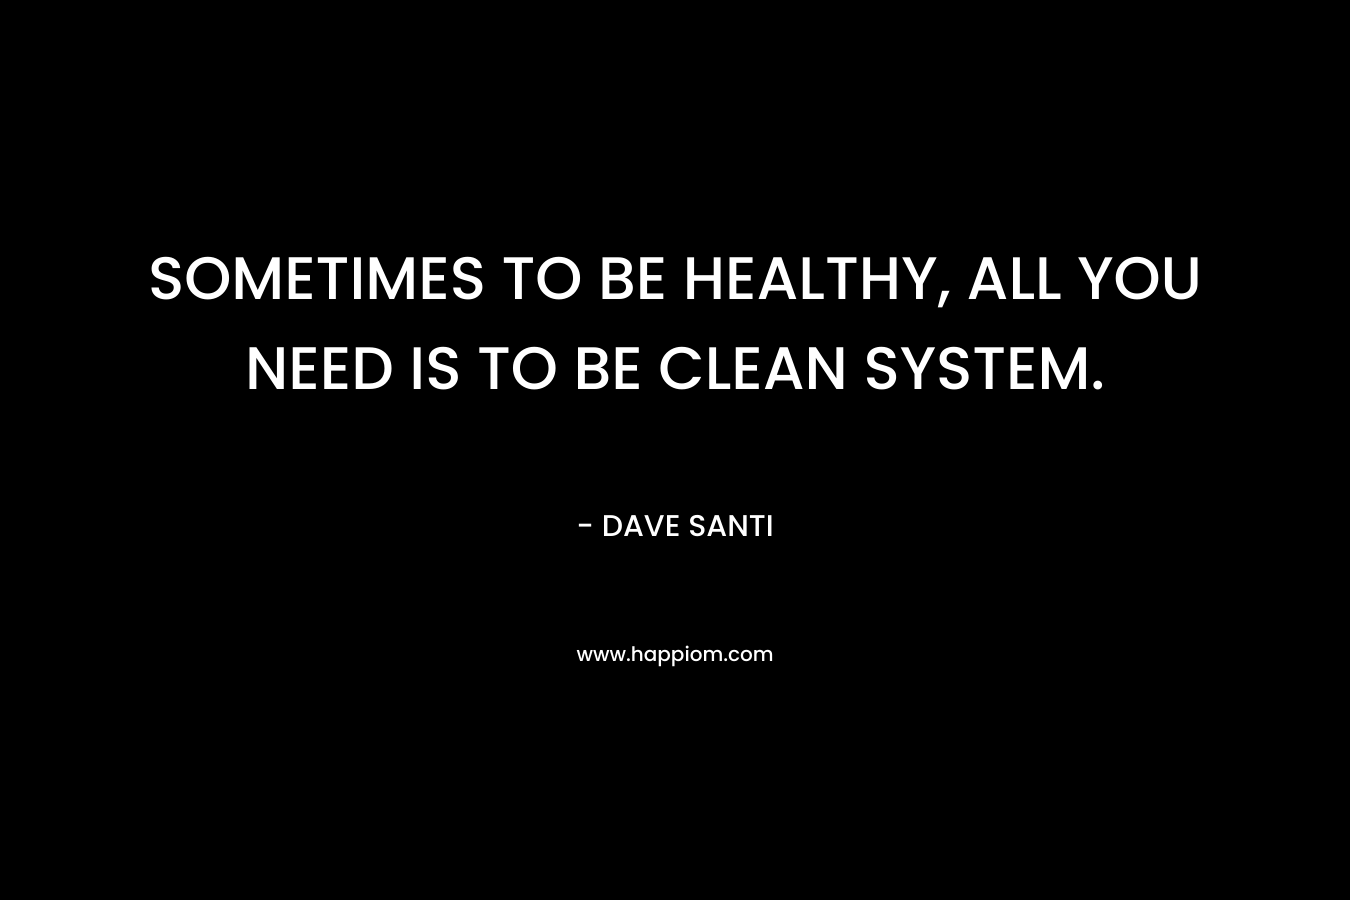 SOMETIMES TO BE HEALTHY, ALL YOU NEED IS TO BE CLEAN SYSTEM.